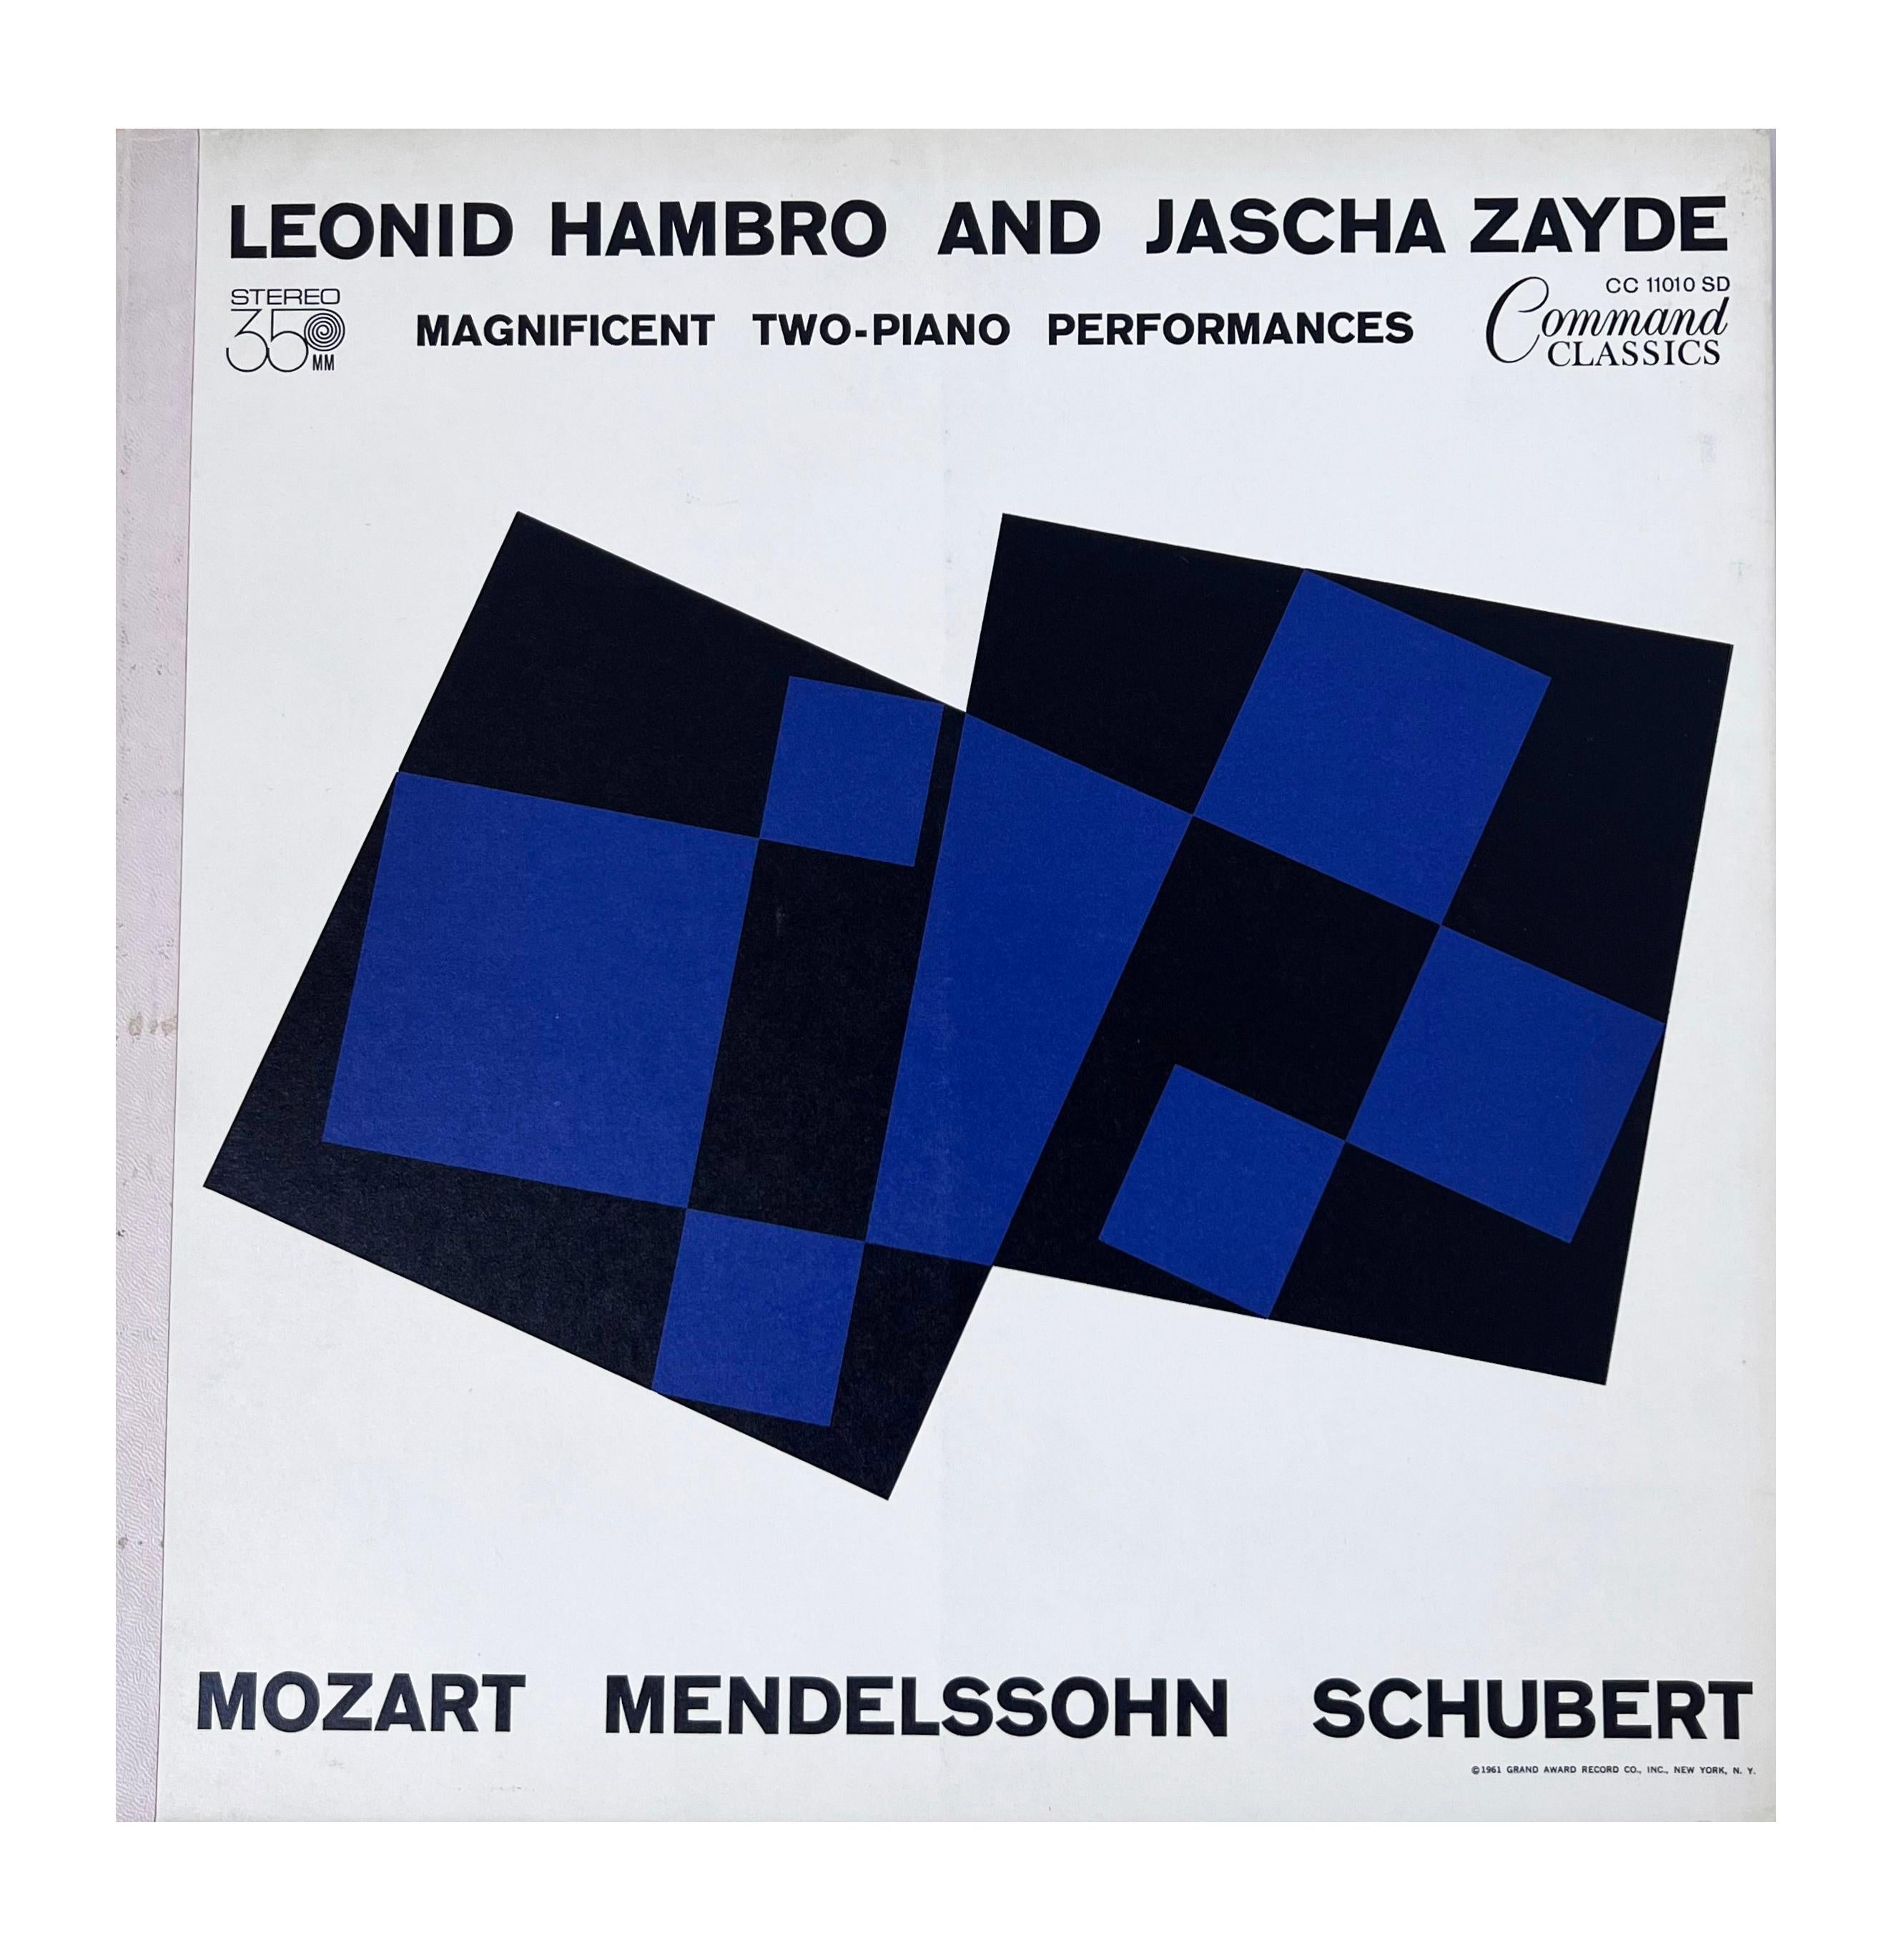 1950s Josef Albers record cover art: set of 7 works (Albers album art) For Sale 5